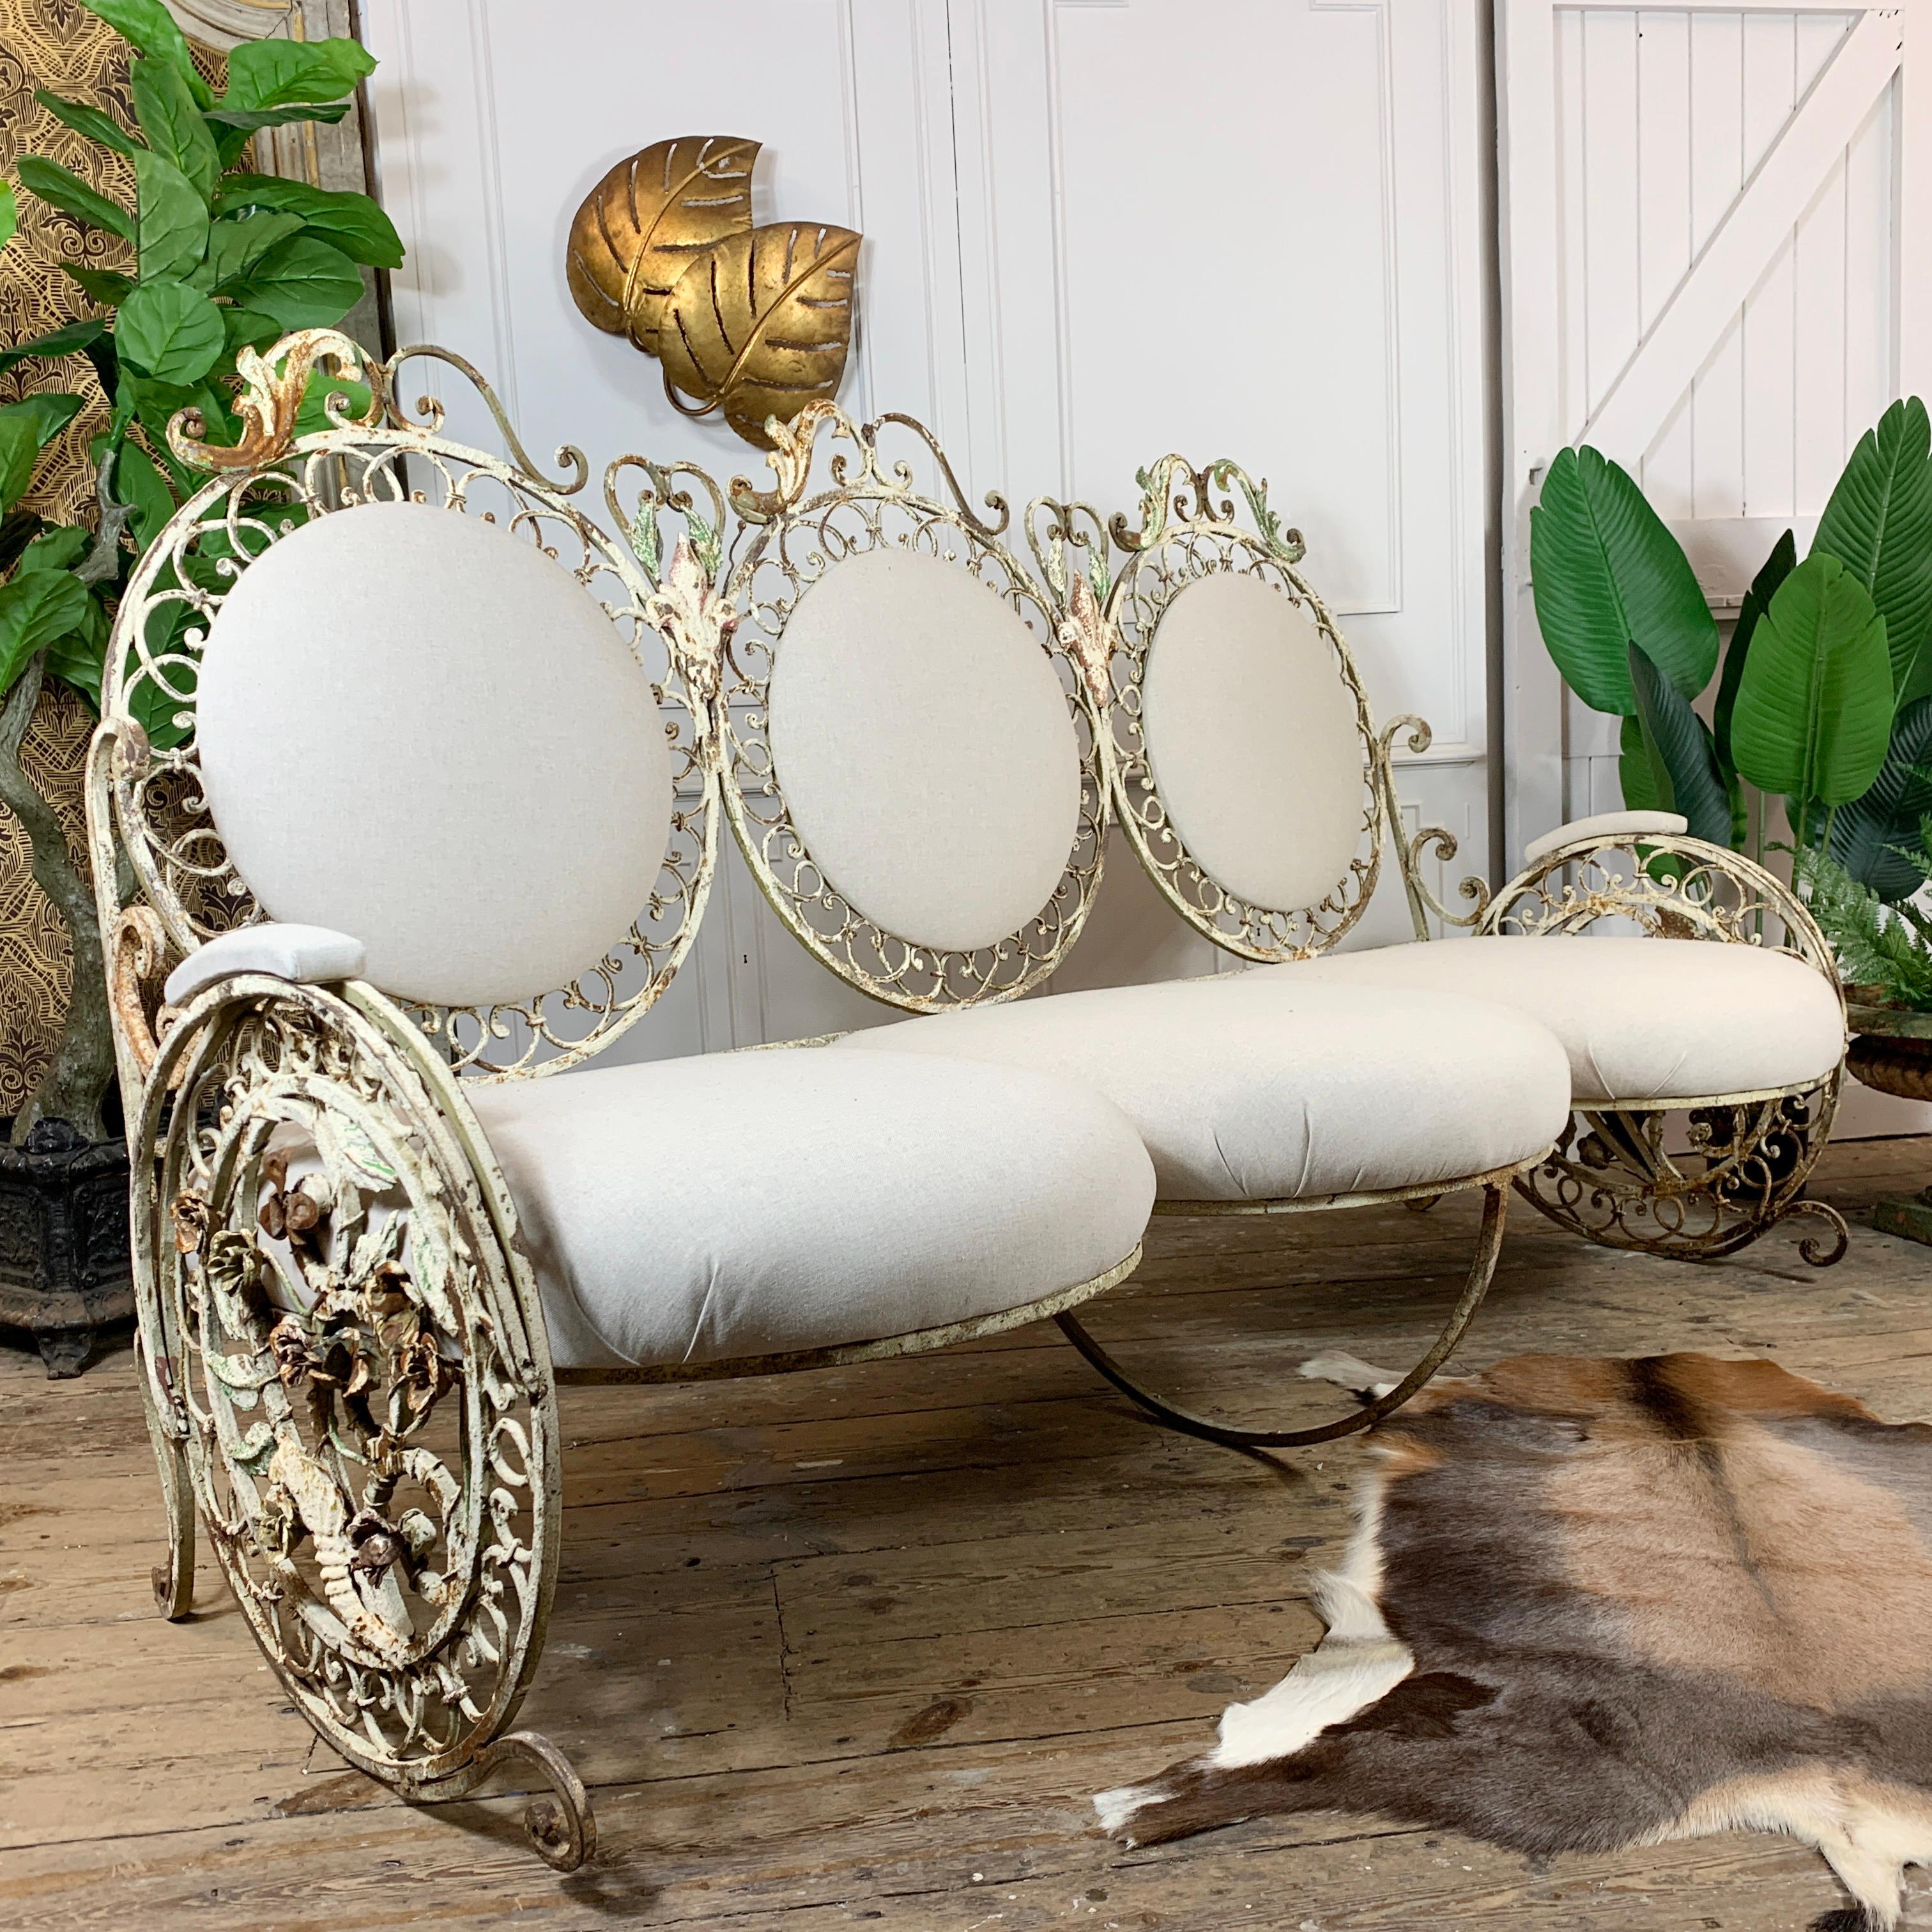 A quite exceptional late 19th century pair of French patio/orangery Settee.

This is a beautiful wrought iron large settee, with the most intricate decorative detailing and workmanship throughout. An abundance of flowers and leaves decorate the